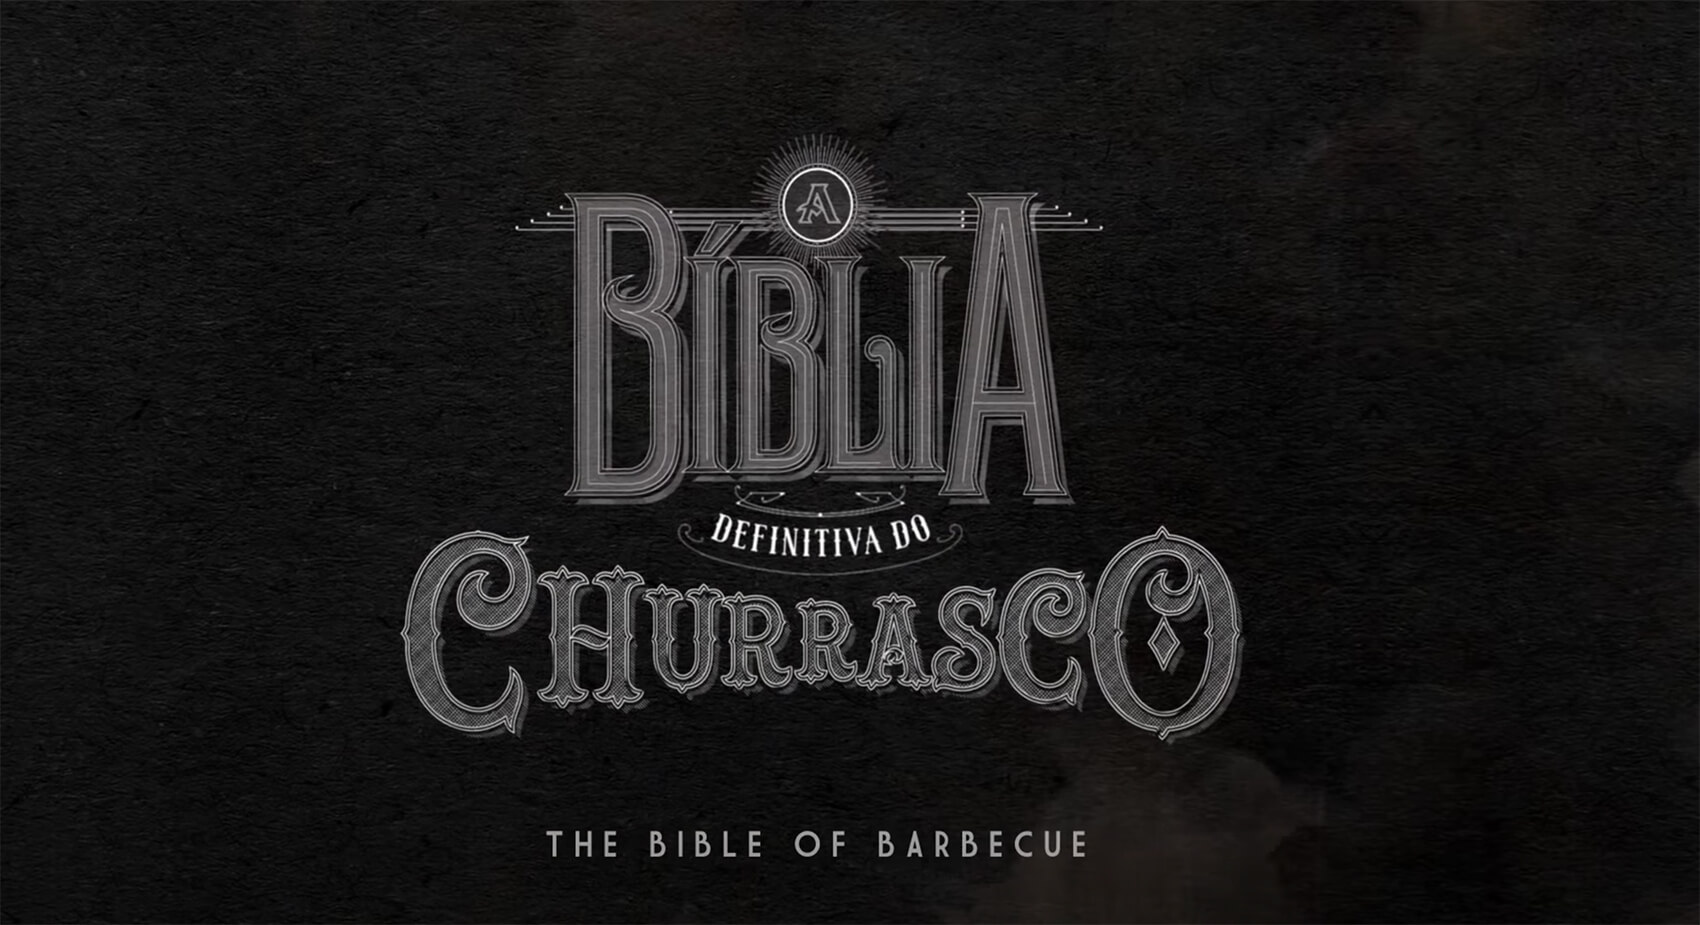 The Bible of Barbecue